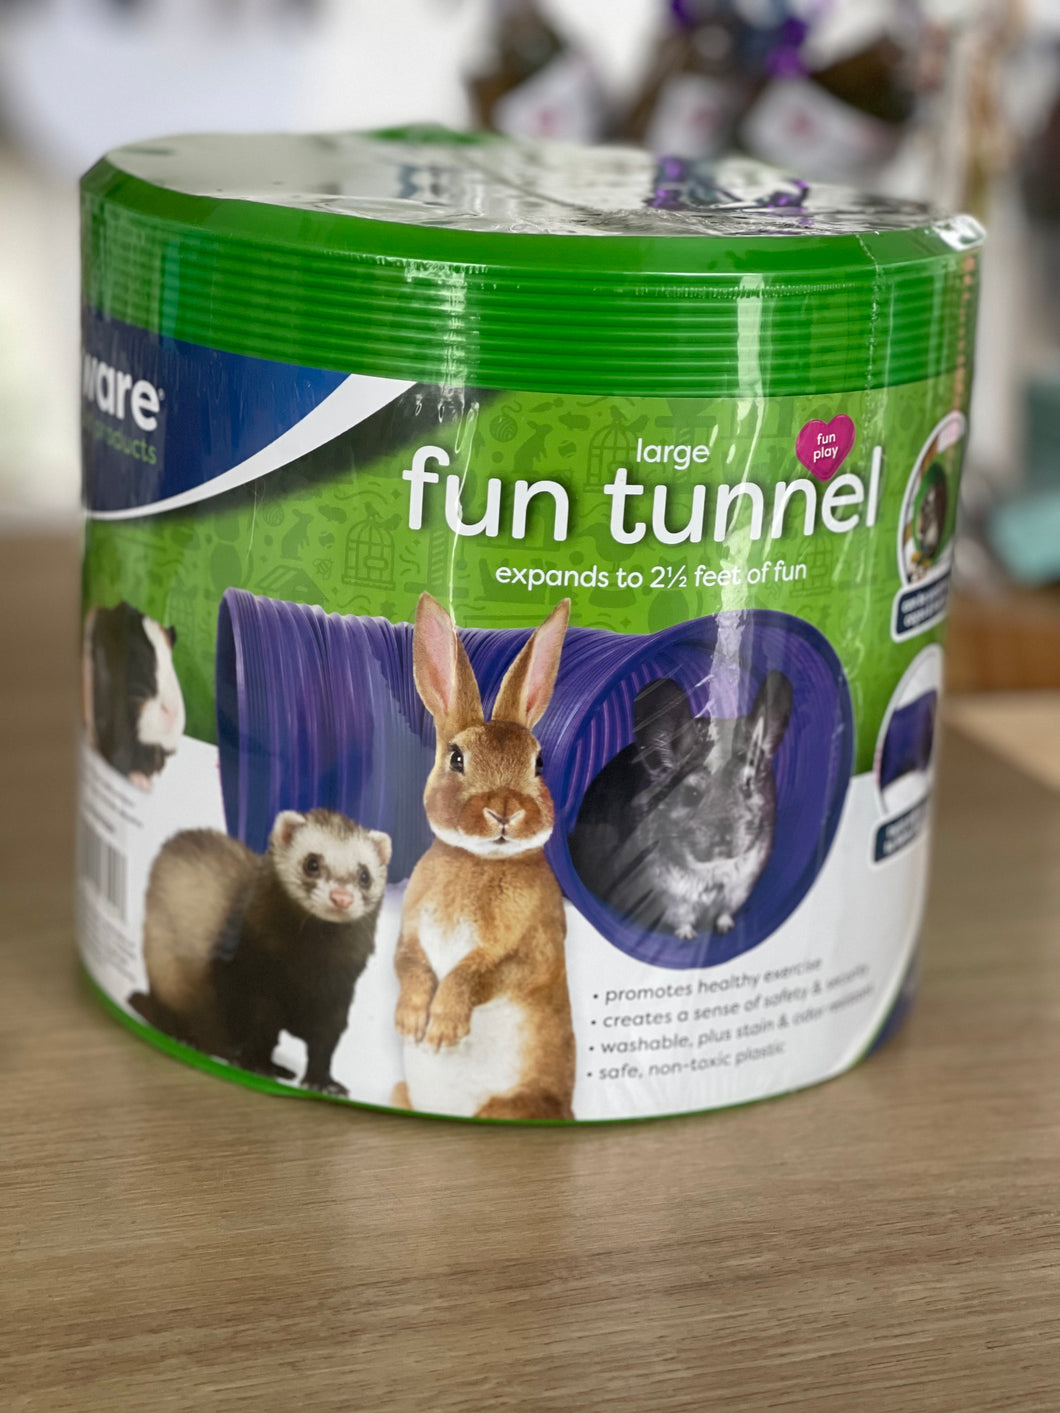 🔴 Large expandable small animal tunnel